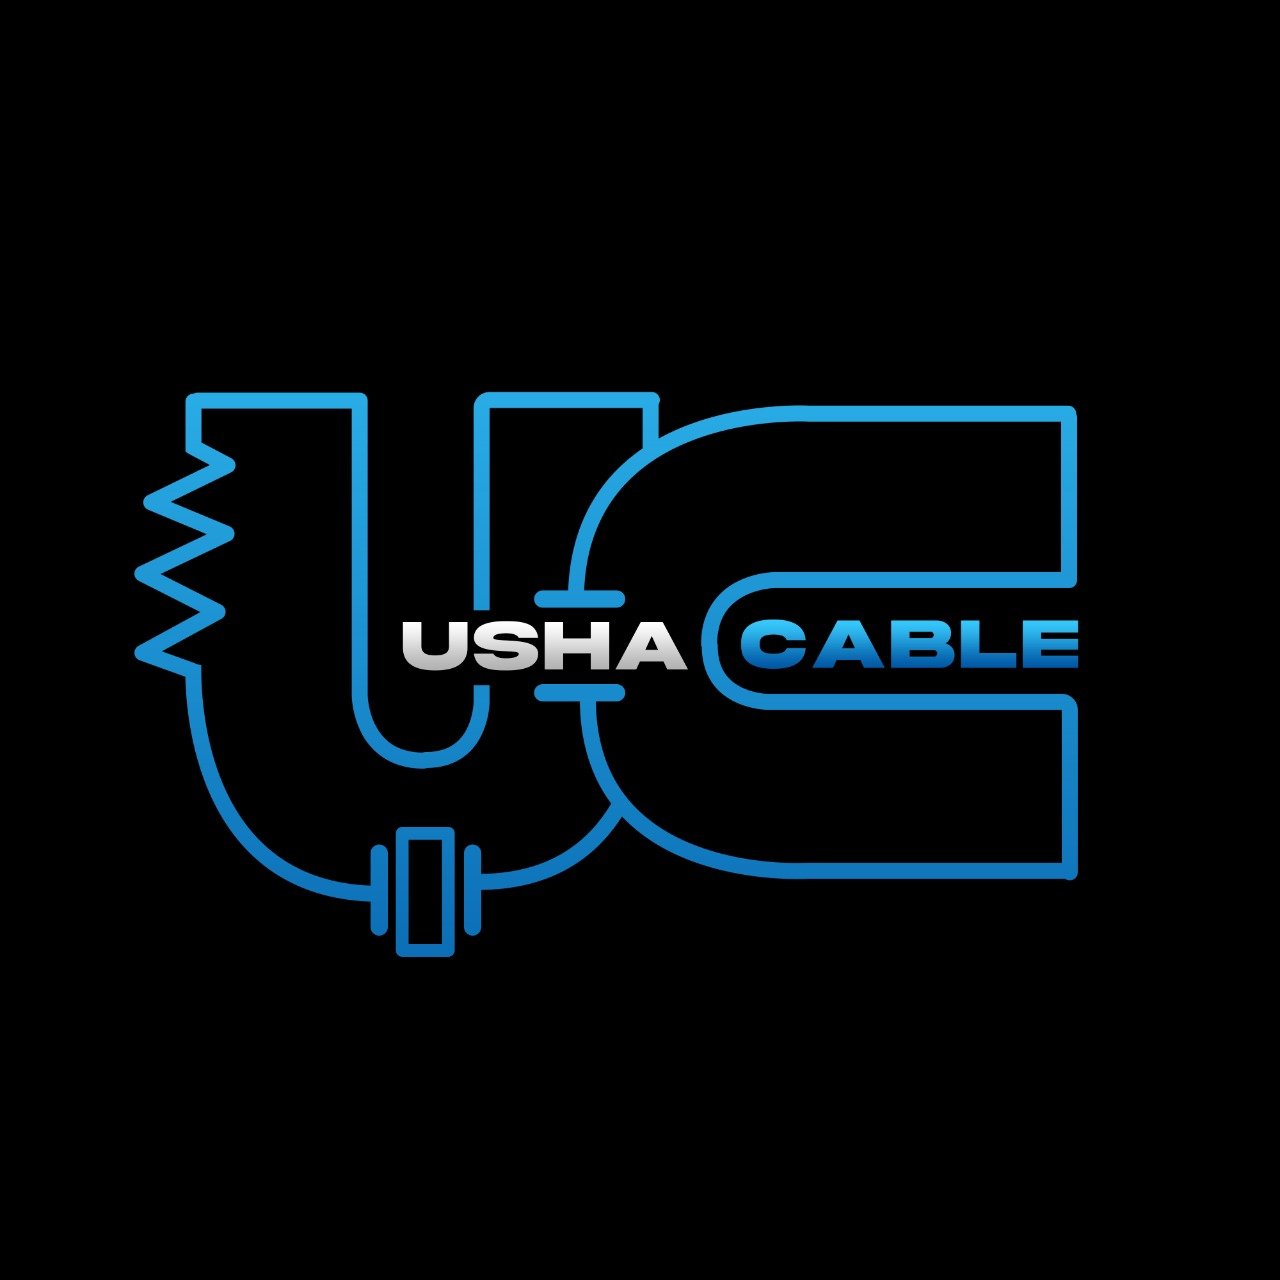 Rashtriya Jagrookta | Usha cable, the brand of Usha cable Industries, keeping in mind the hindrance faced farmers has launched Agriculture Cable and Special Project Cable...